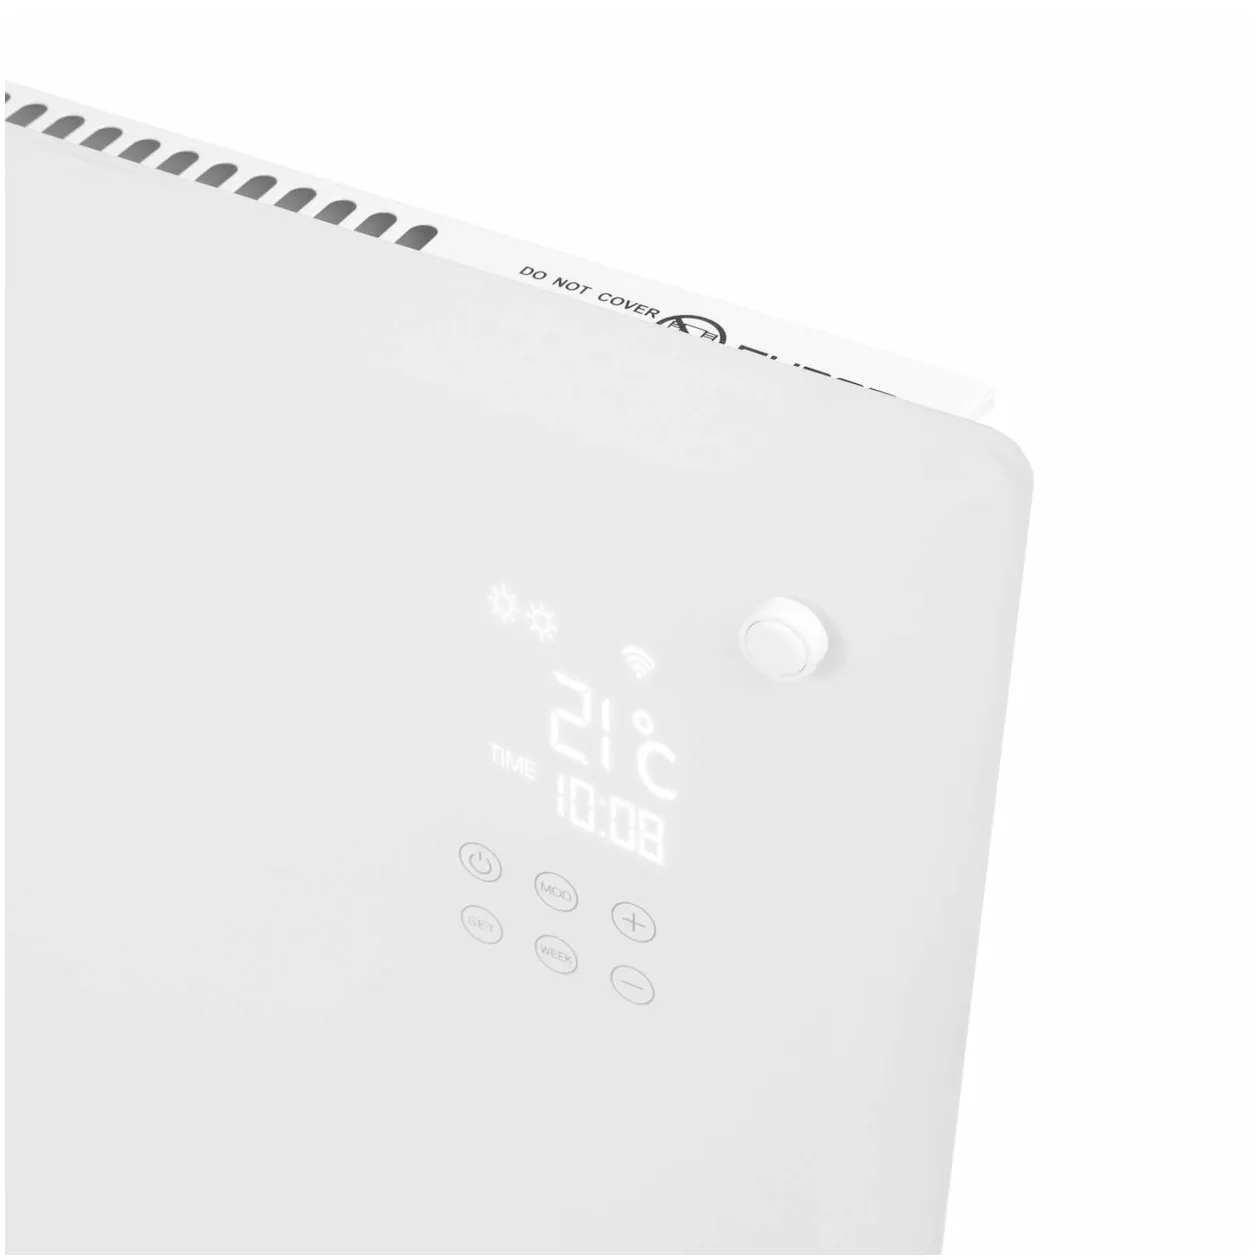 Eurom Alutherm Verre 1500 Wi-Fi